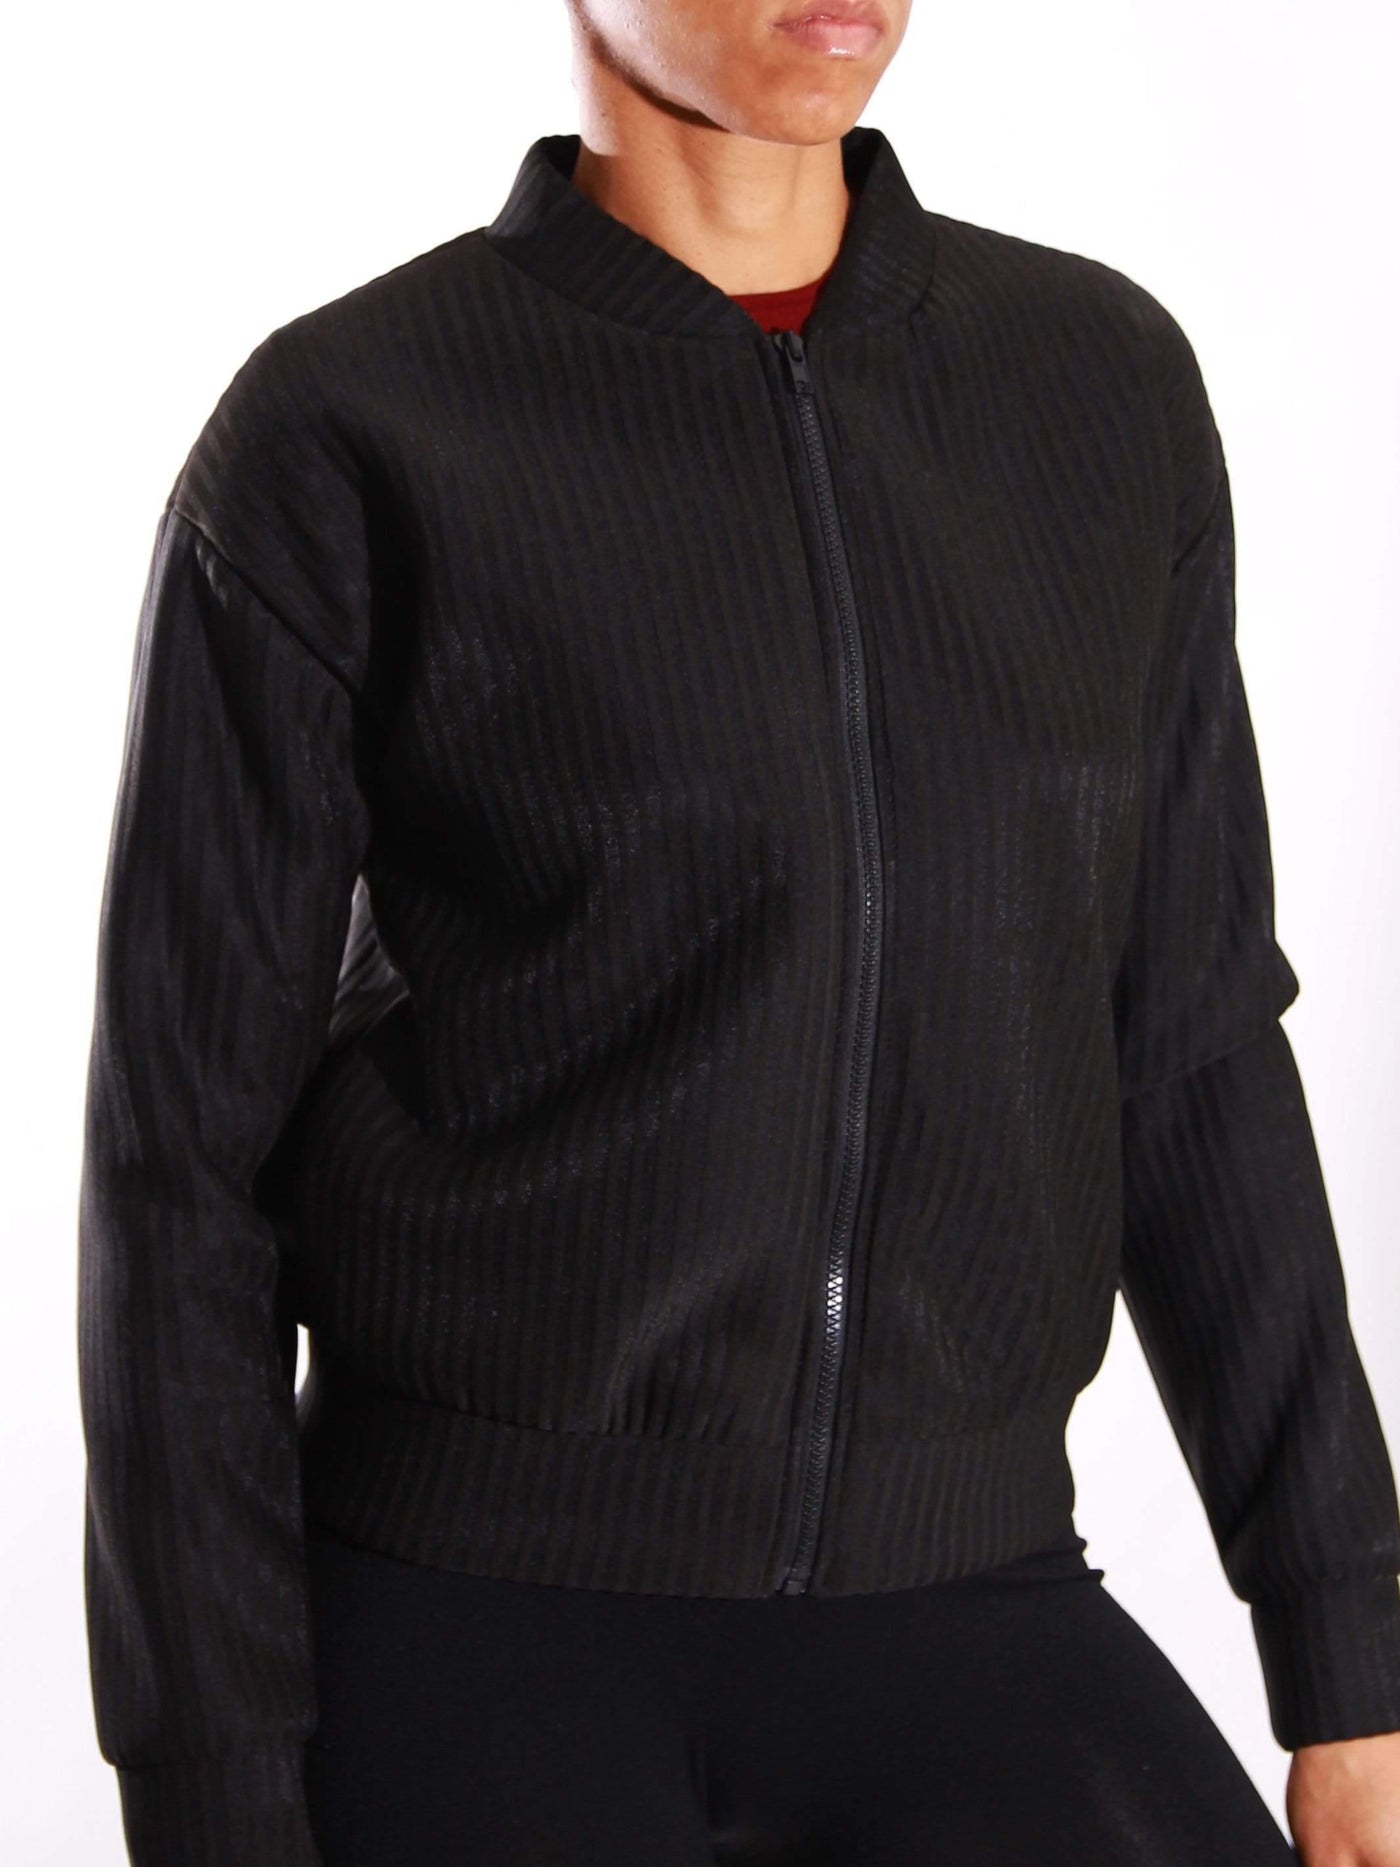 Crisp Call | Ribbed Bomber Jacket SIZE MEDIUM - Statement Piece NY _tab_final-sale, _tab_size-chart, Black, black jacket, bomber, bomber jacket, Brooklyn Boutique, chic, clearance, cute jackets, Fall, Fall Fashion, final sale, jacket, Long Sleeve, Misses, Monochrome, not clearance, pink, Ships from USA, SPNY Exclusive, Standard Fall, statement, Statement Clothing, statement piece, Statement Piece Boutique, statement piece ny, Statement Pieces, Statement Pieces Boutique, Women's Boutique Statement Outerwear